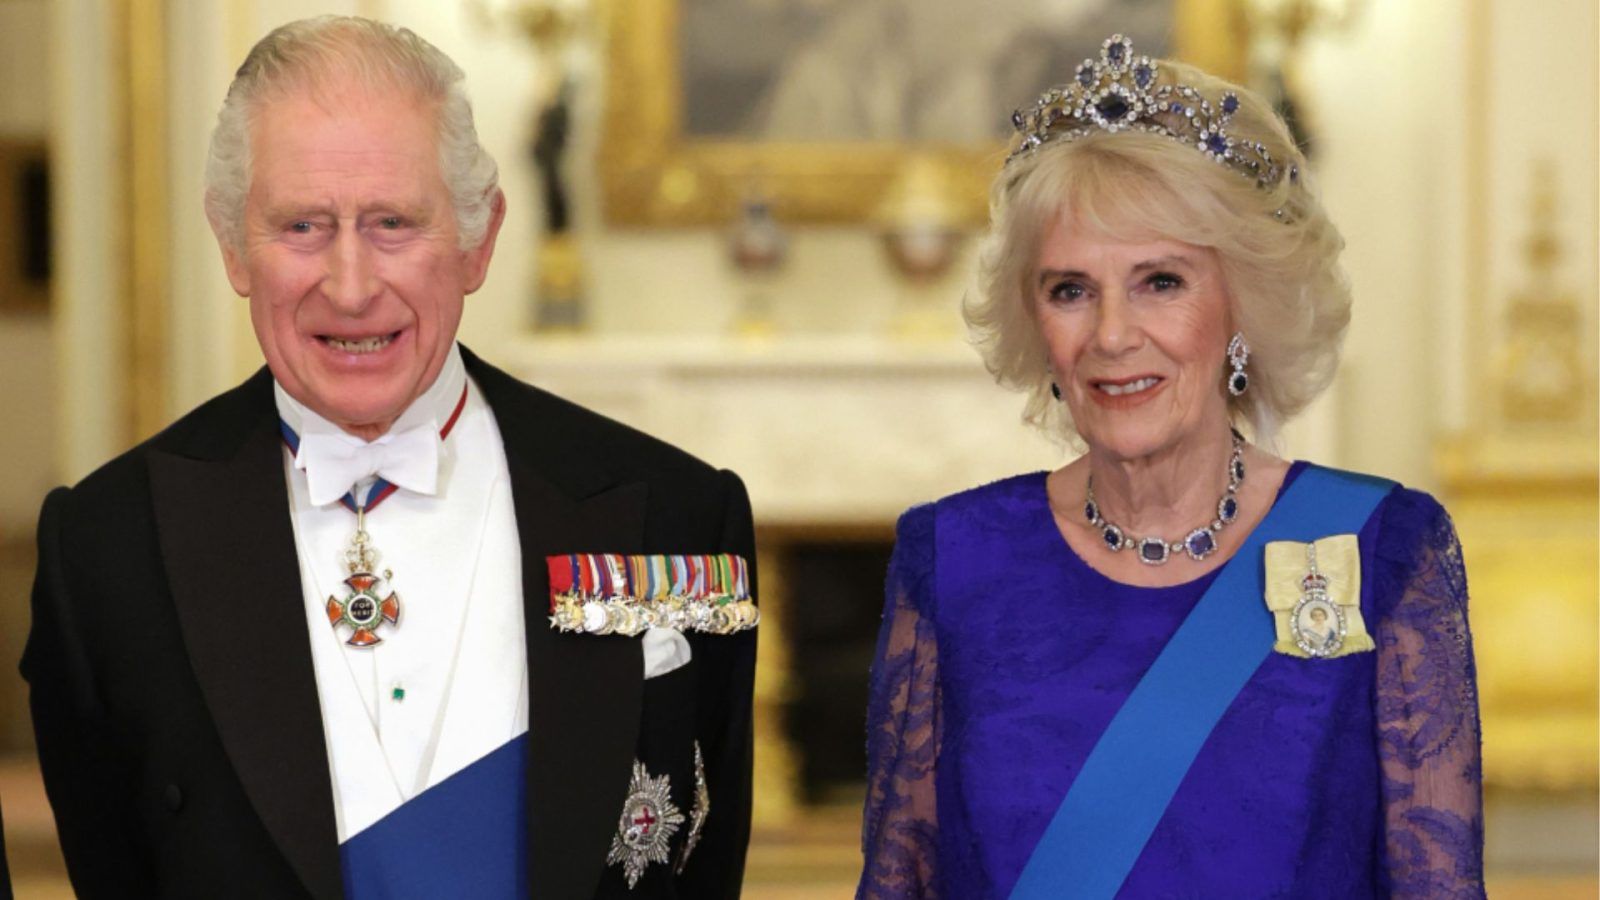 Coronation of King Charles III: Guests, procession and other details